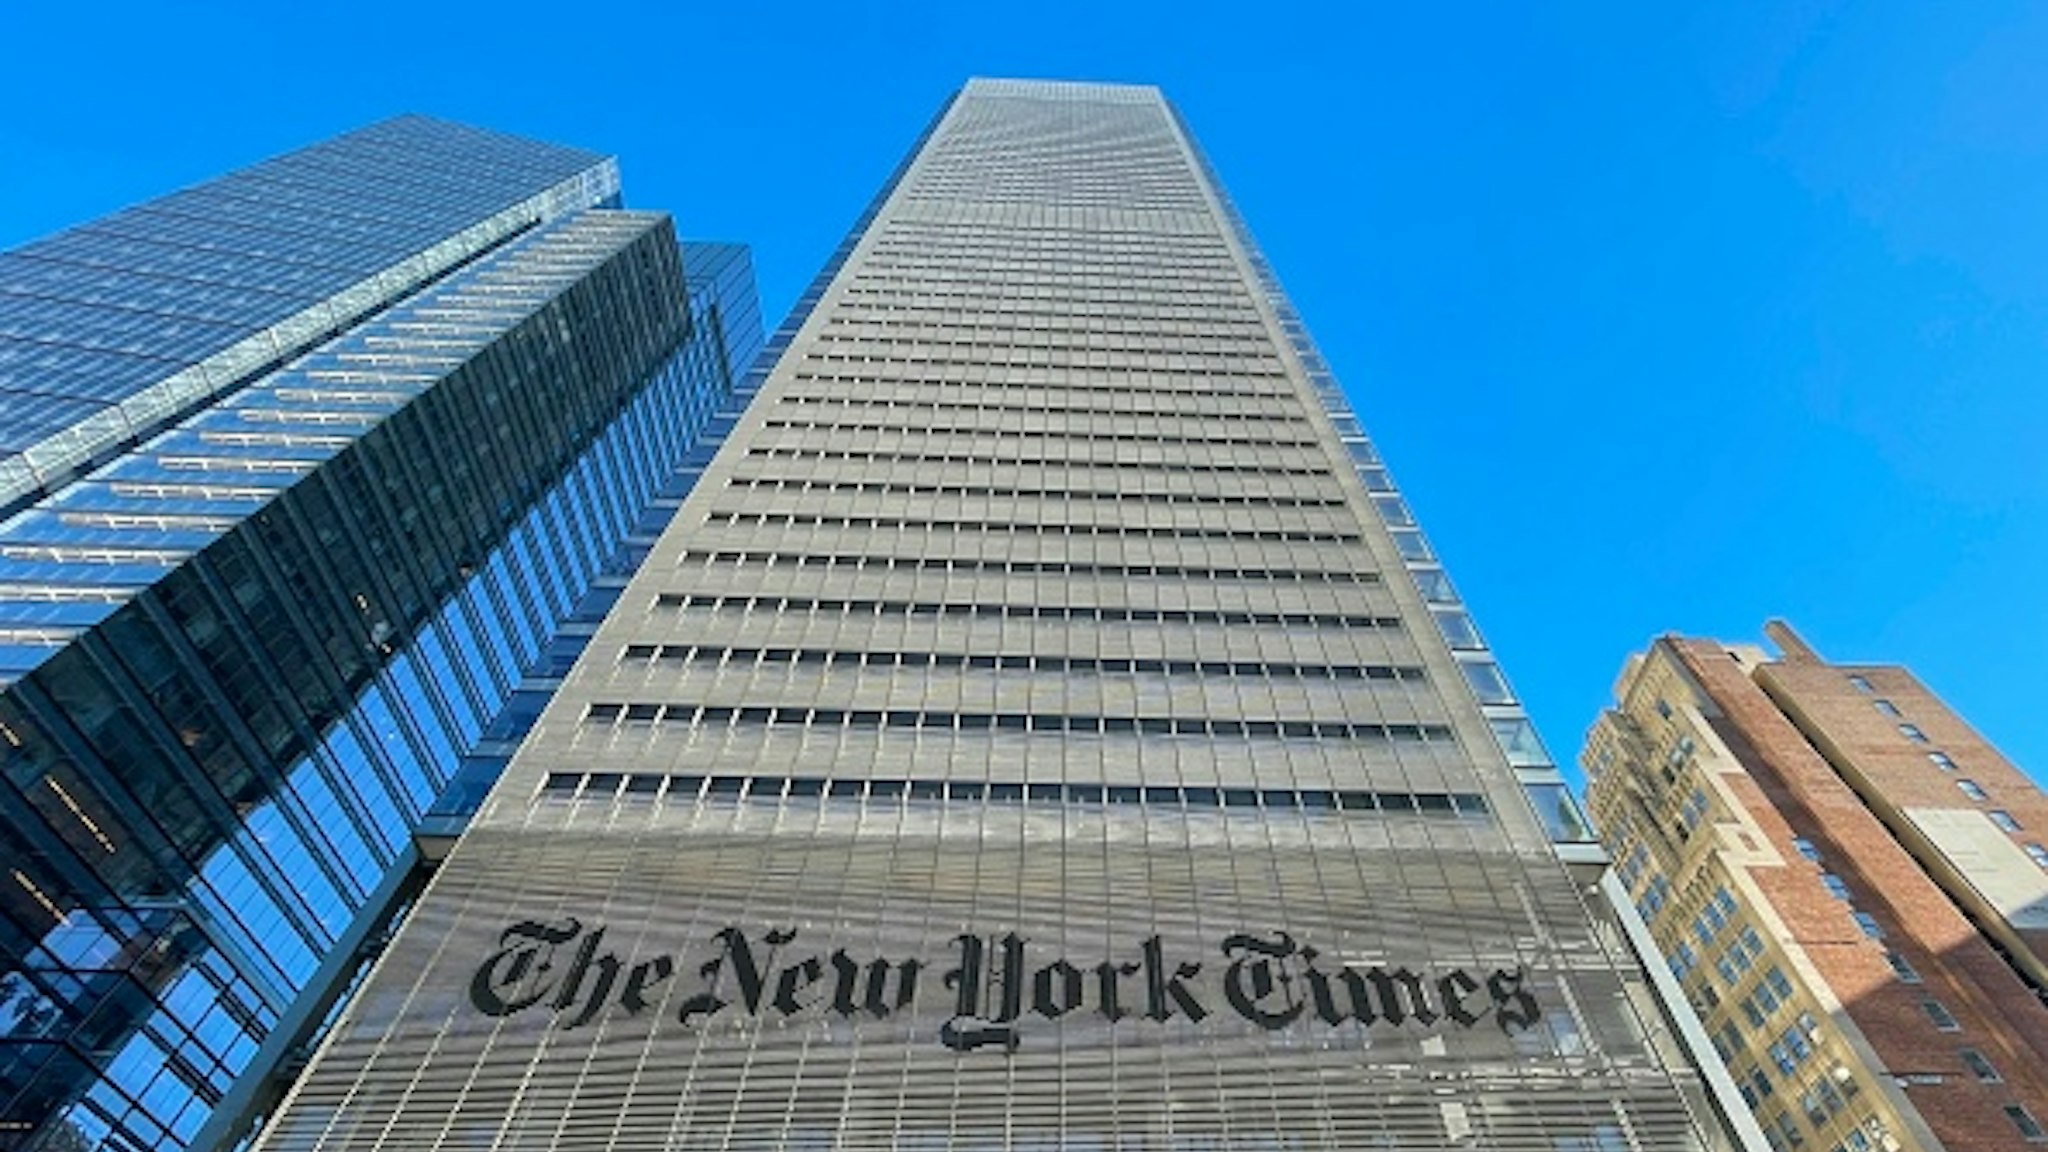 The New York Times Building is seen in New York City on February 4, 2021.